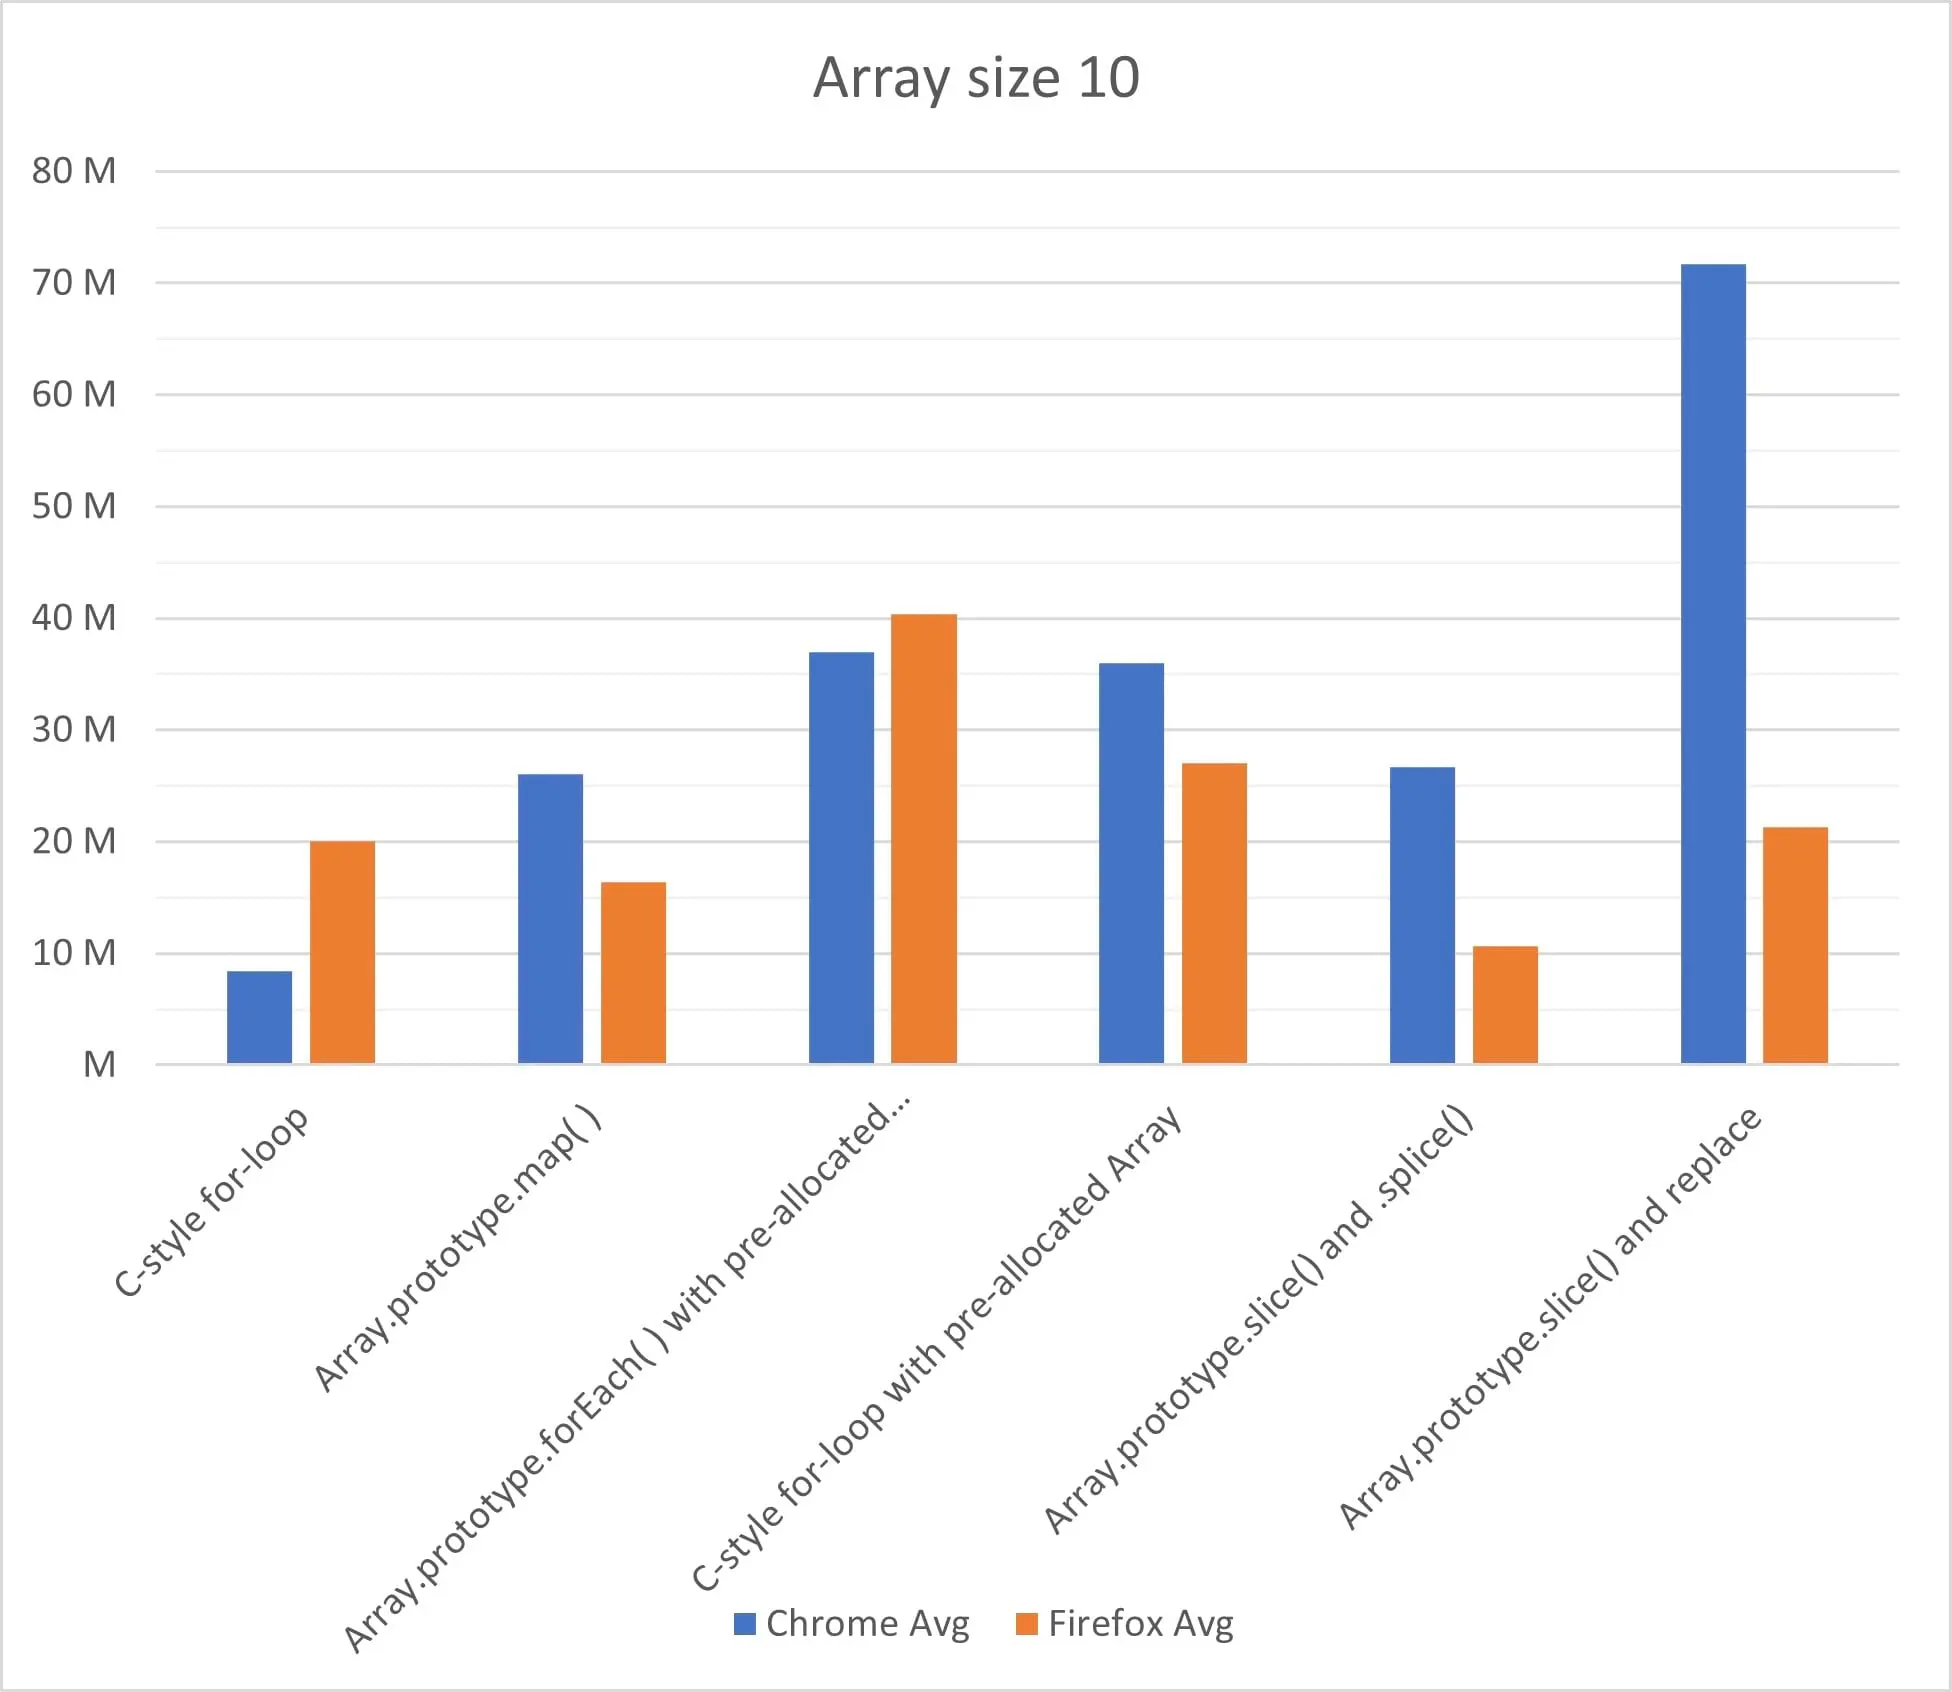 The two browsers compared at array size 10